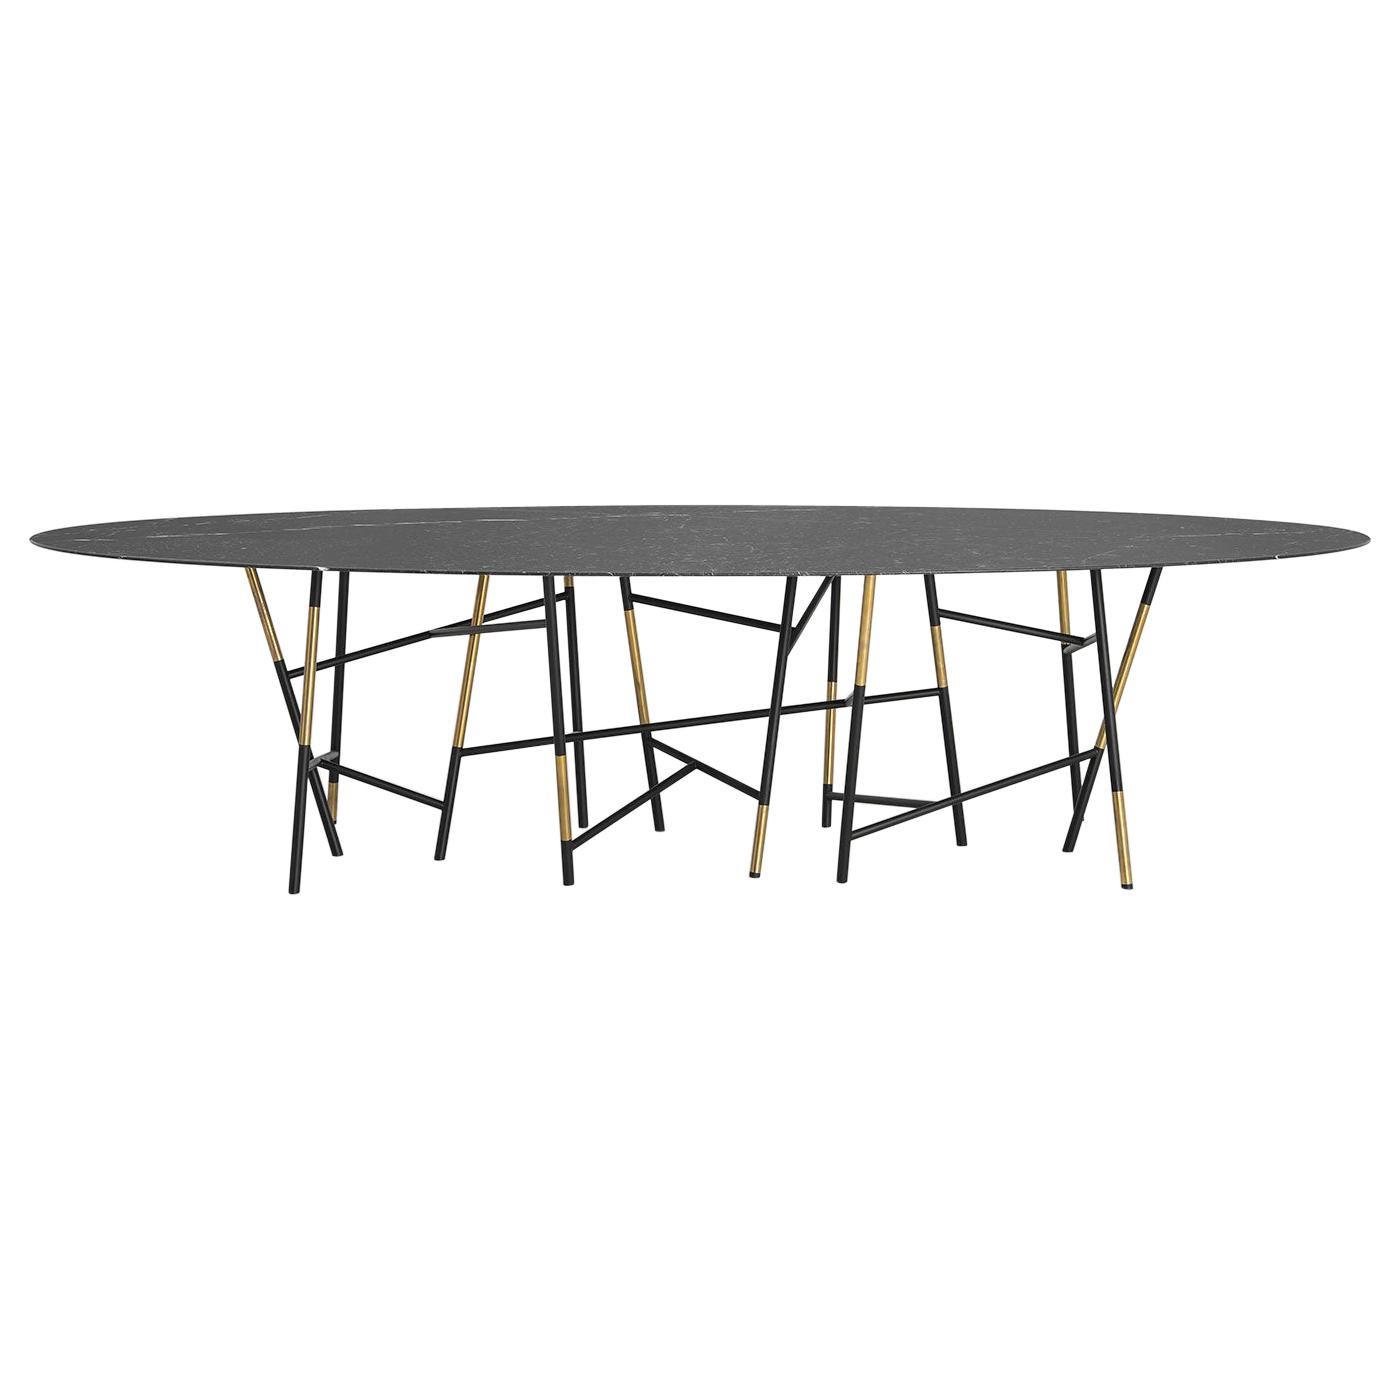 Large Italian Marble Oval Dining Table in Painted Metal & Brass by Dimoremilano For Sale